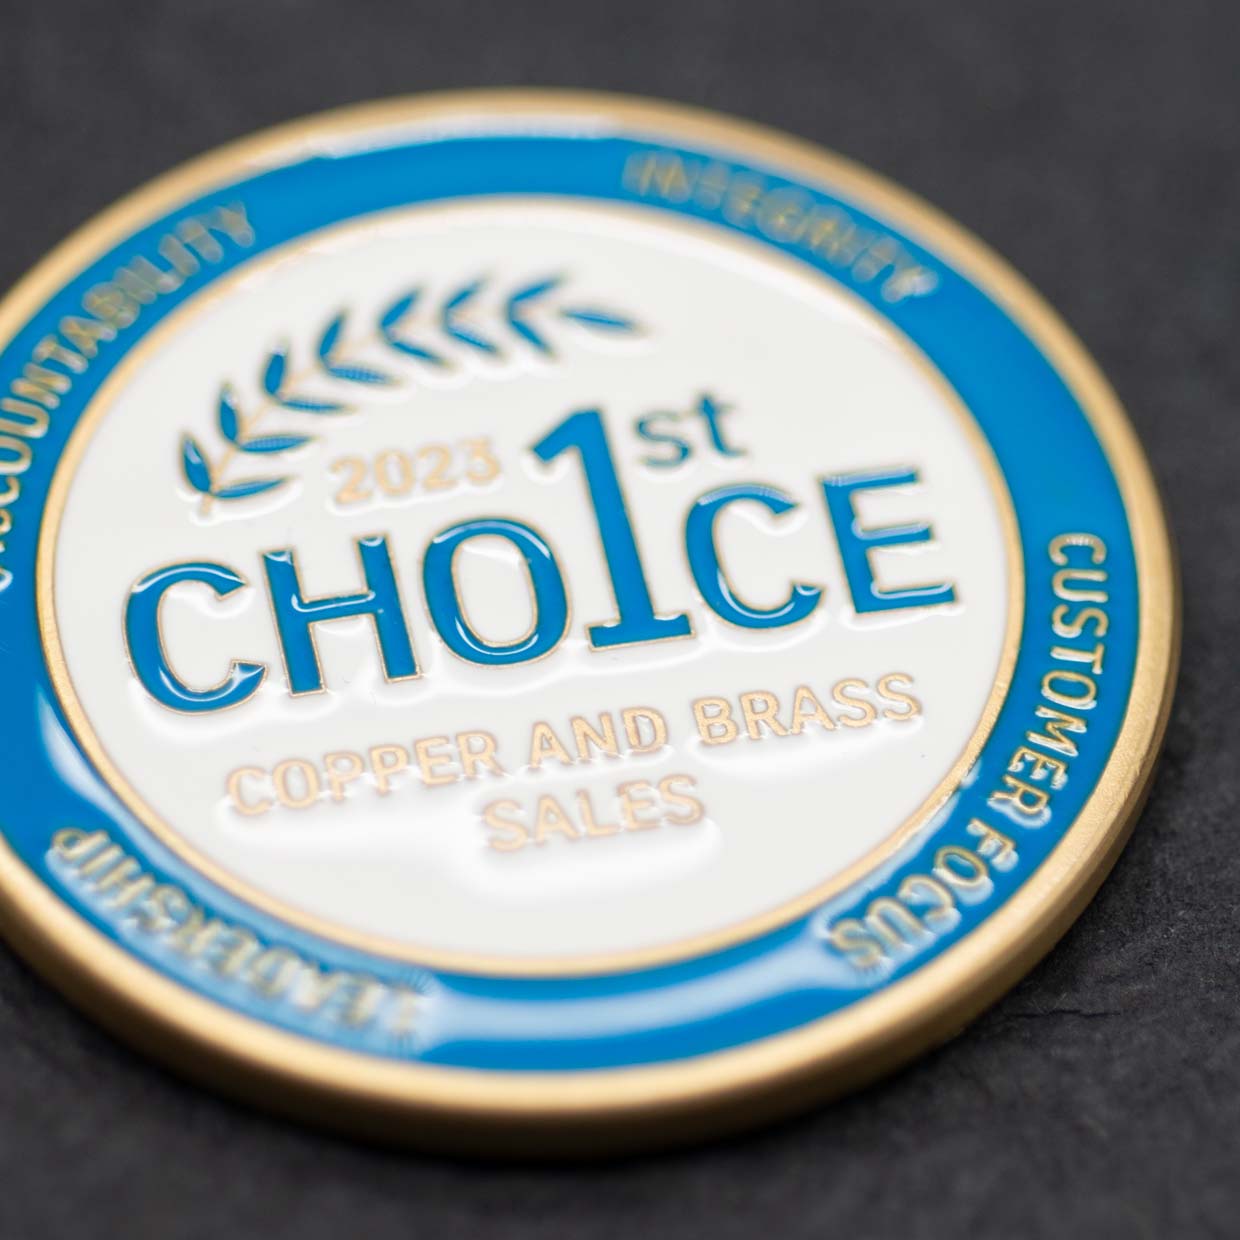 1st Choice Copper and Brass Sales Coin Detail